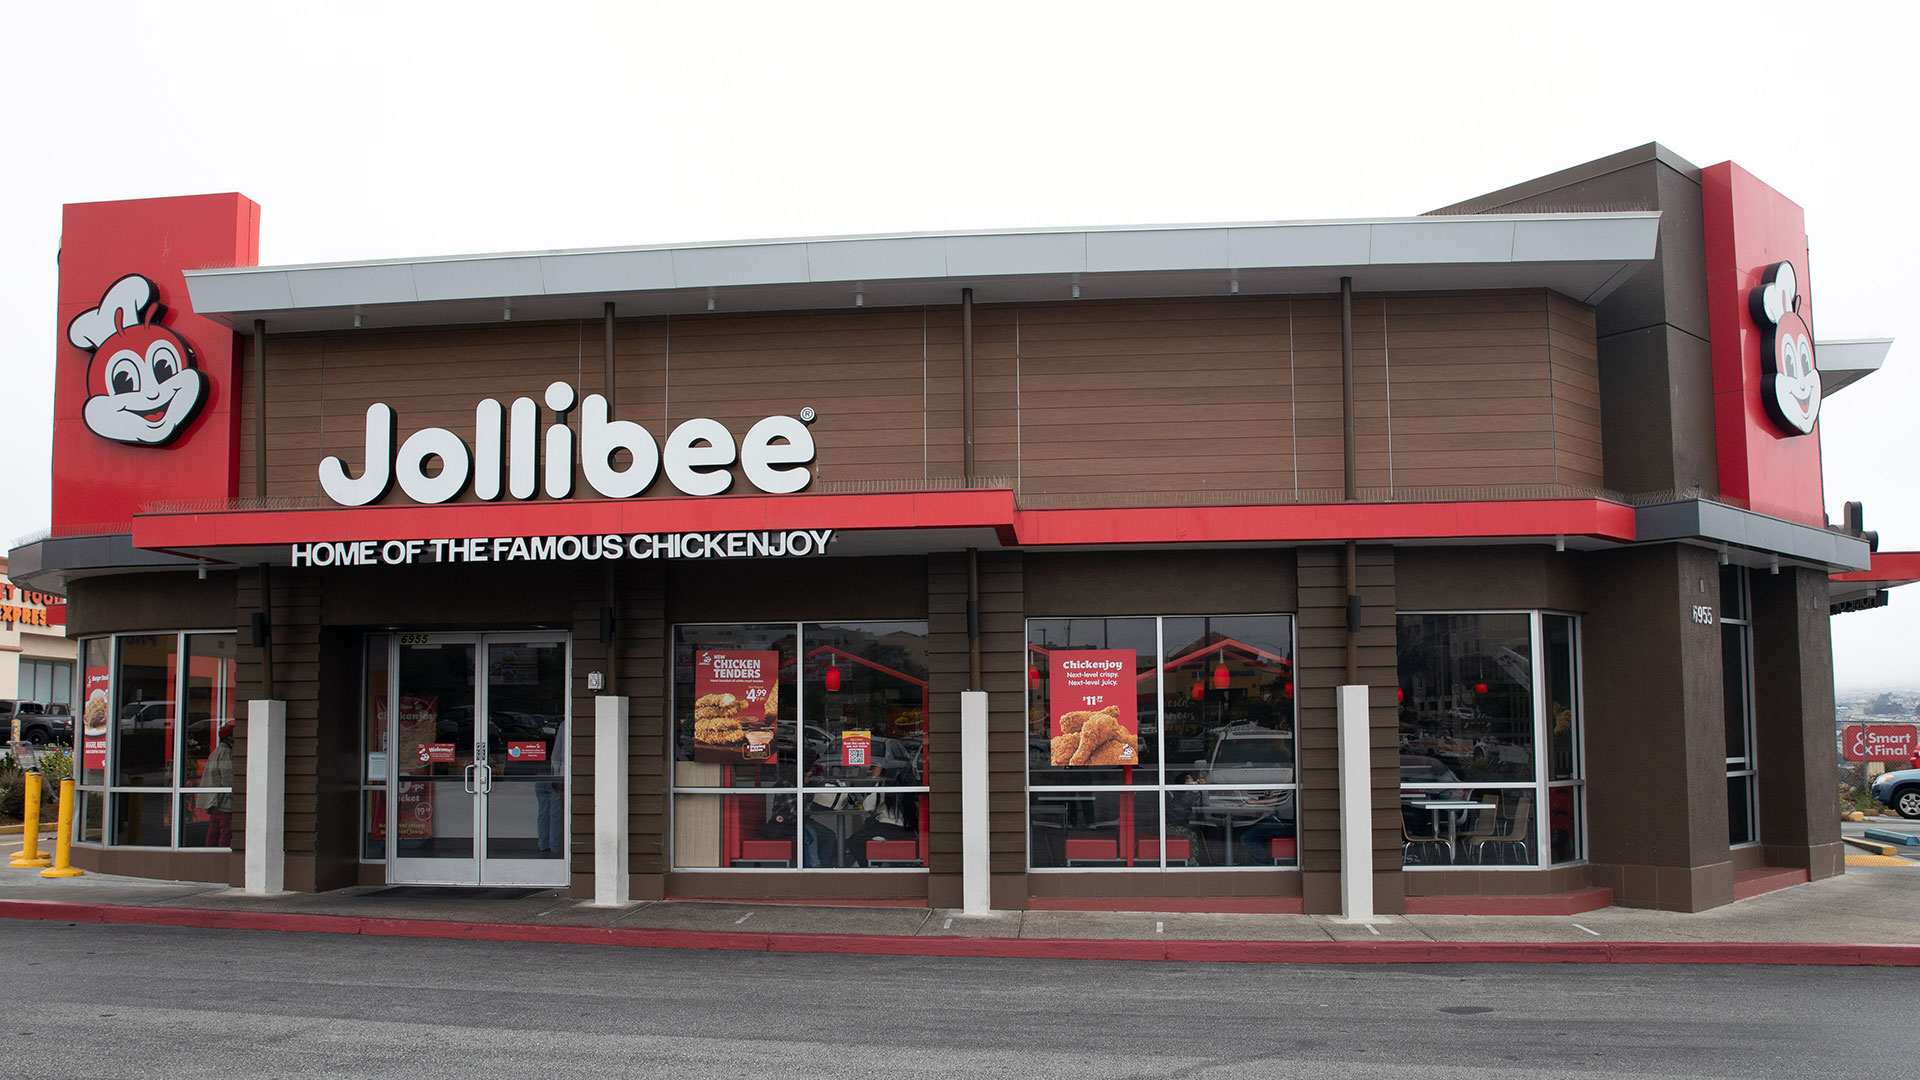 There are now 37 Jollibees locations across the U.S., but the first one opened in Daly City.